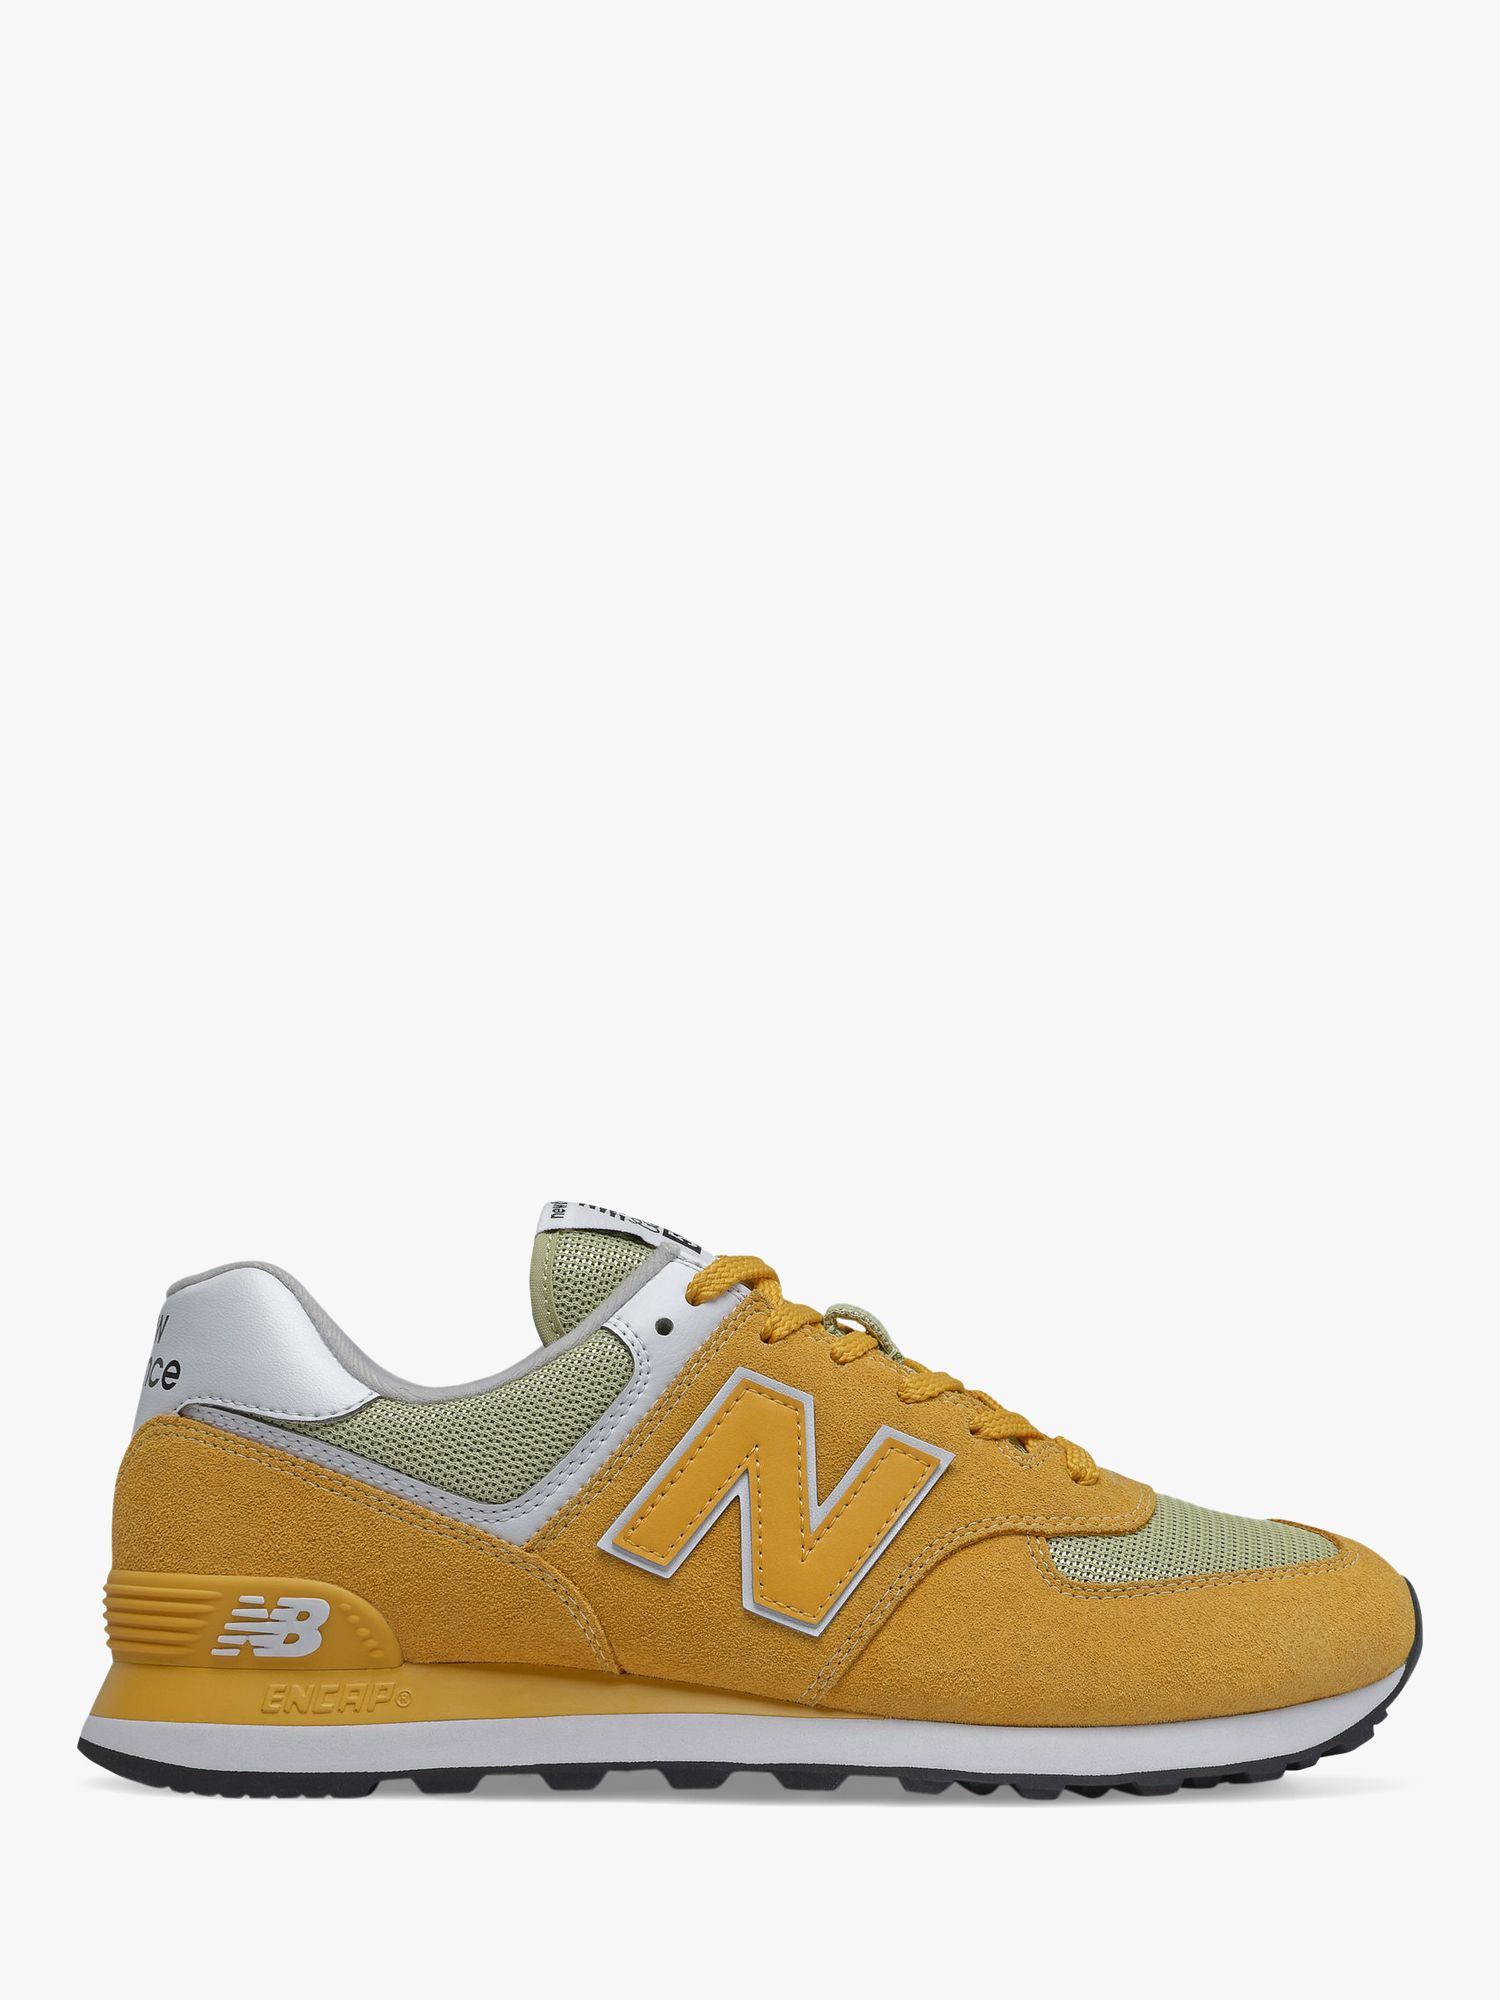 New Balance 574 Suede Trainers, Aspen/White at John Lewis & Partners